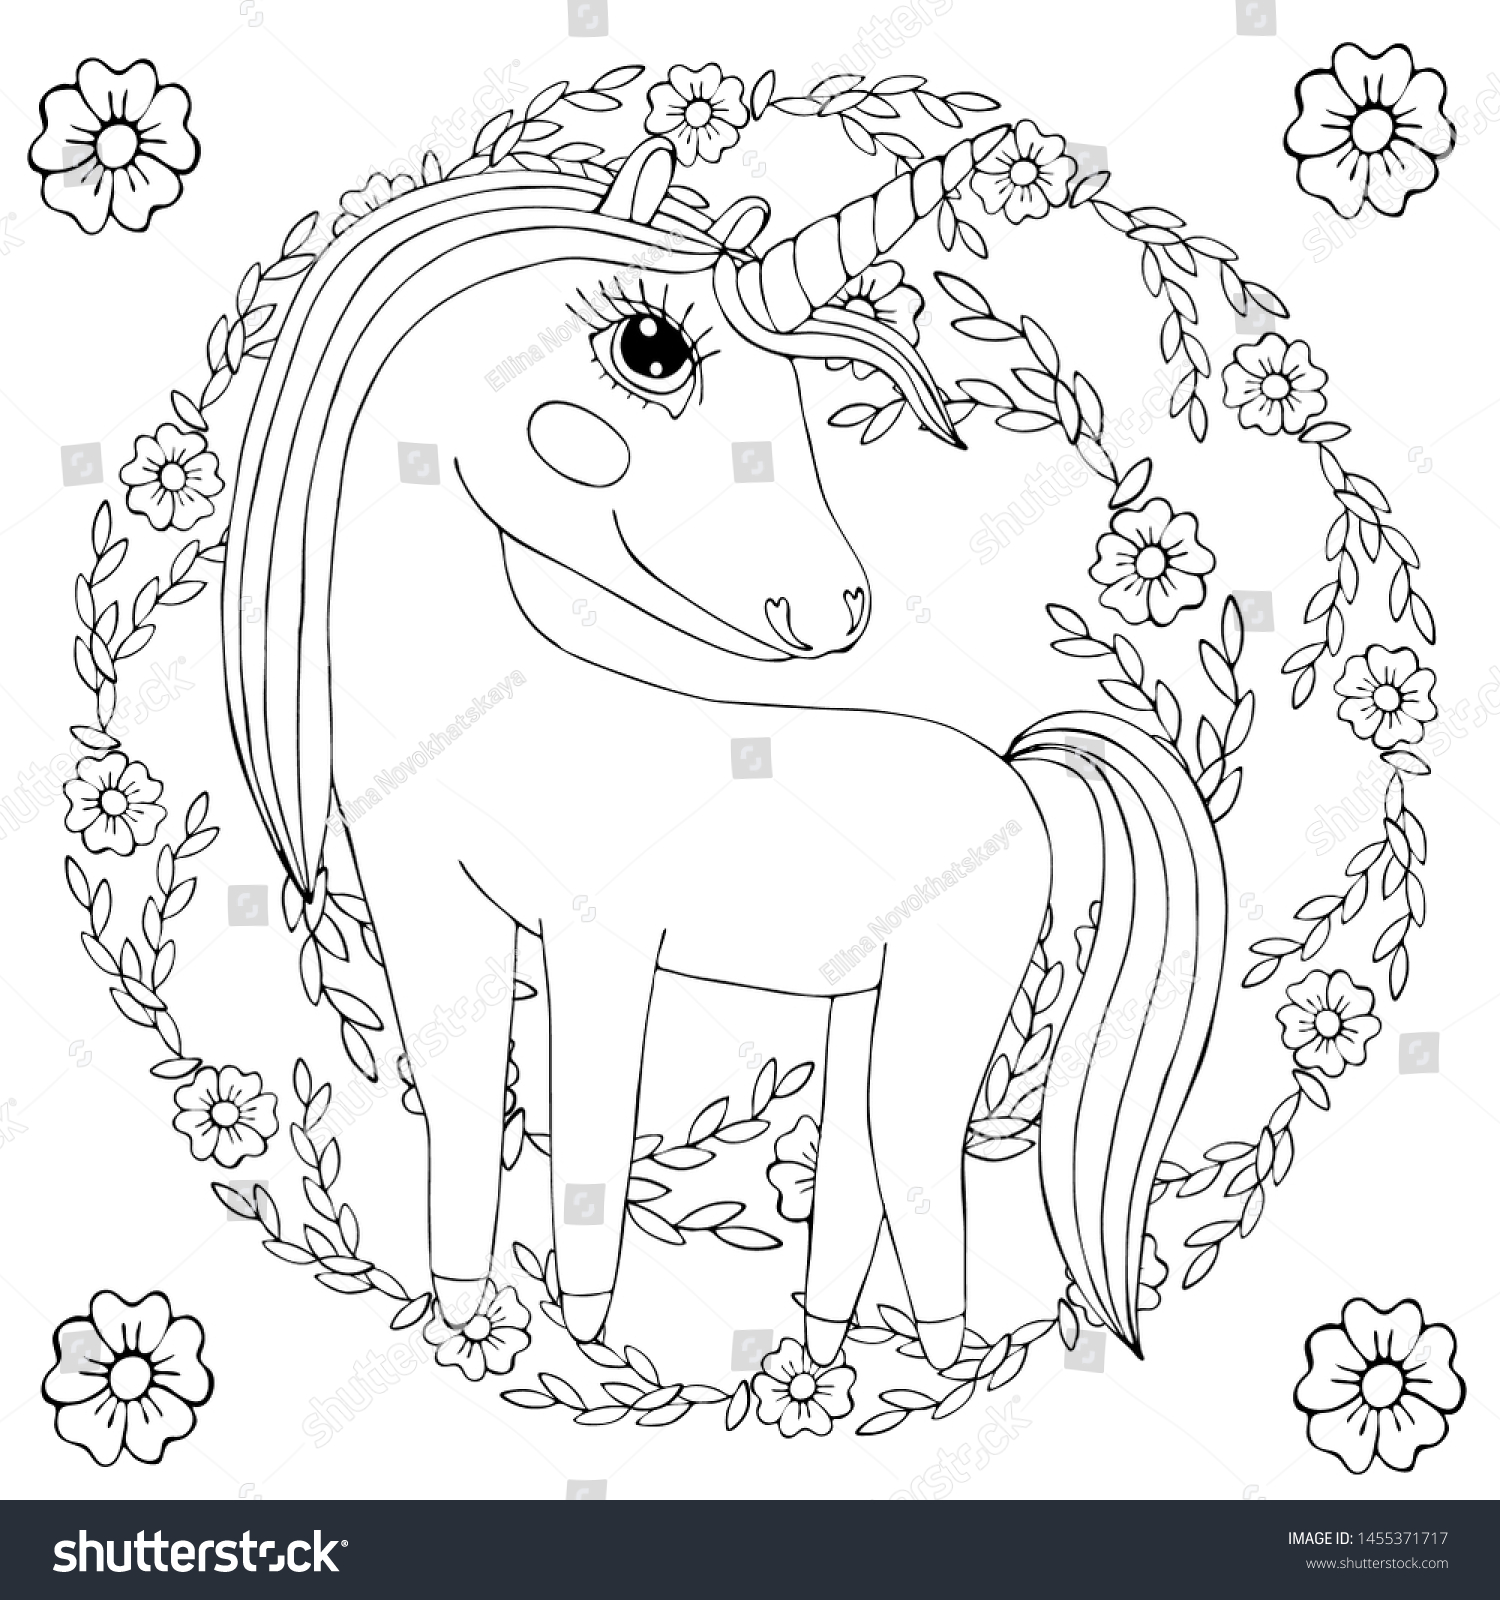 Adorable Unicorn Coloring Pages